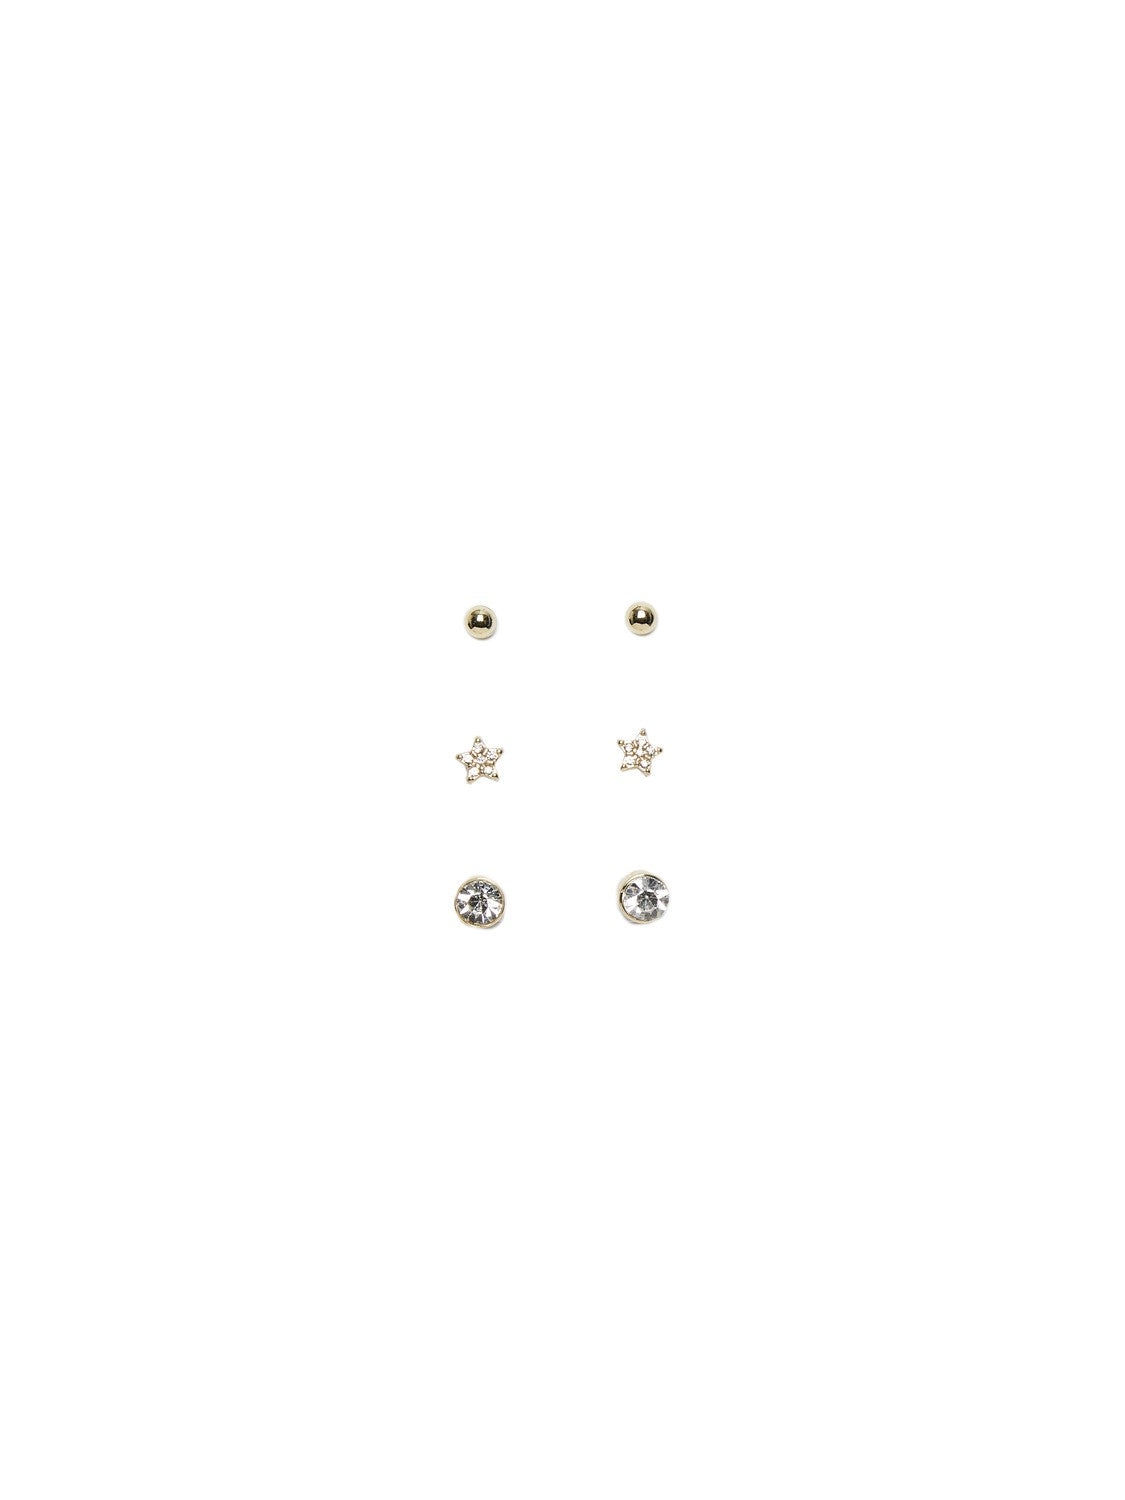 DESNI EAR STUDS 3 PACK (GOLD)